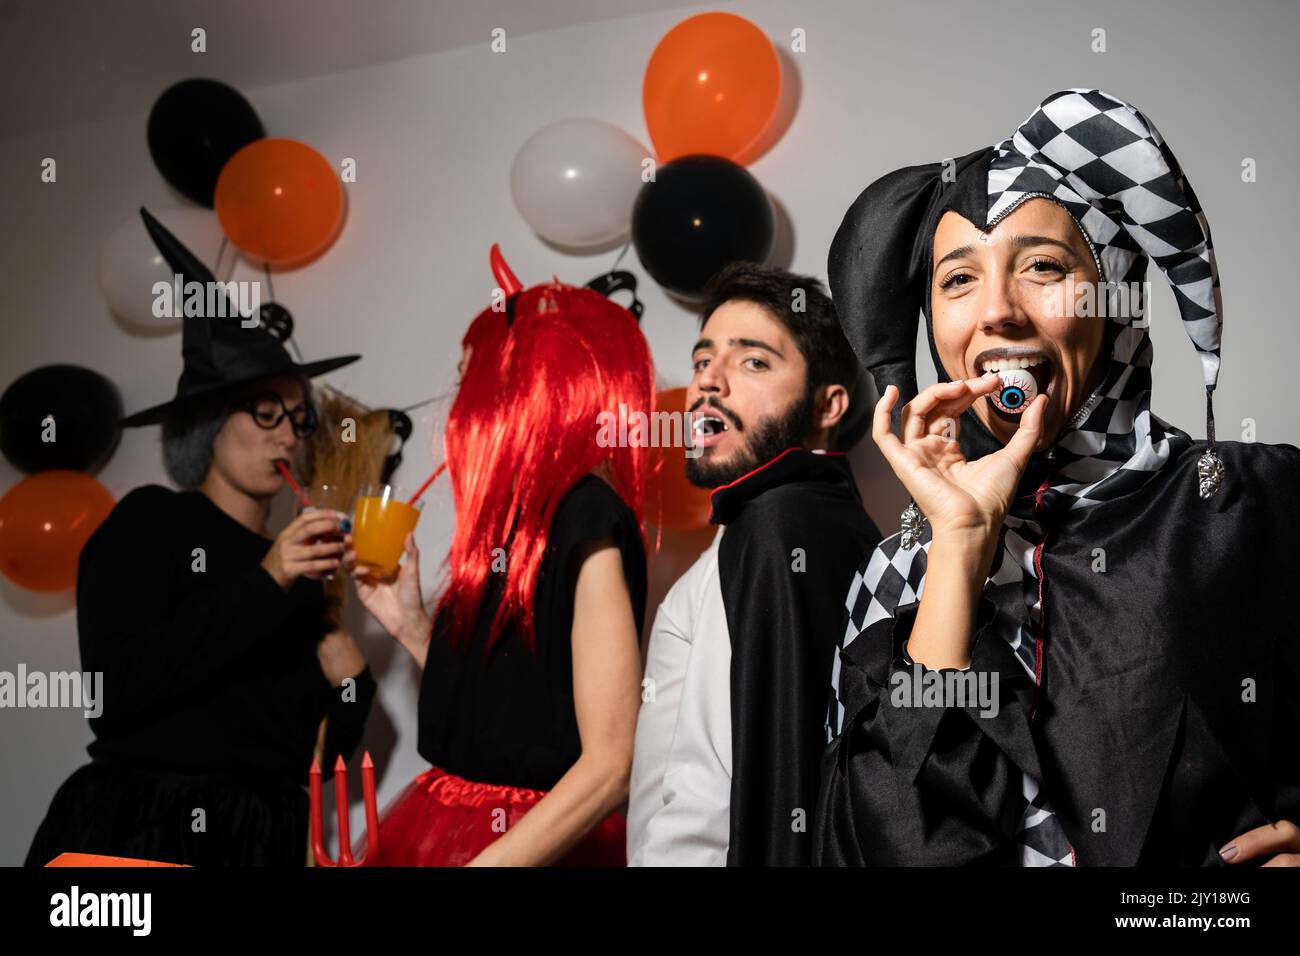 Halloween party at home. Devil, witch, dracula and harlequin posing and having fun Stock Photo